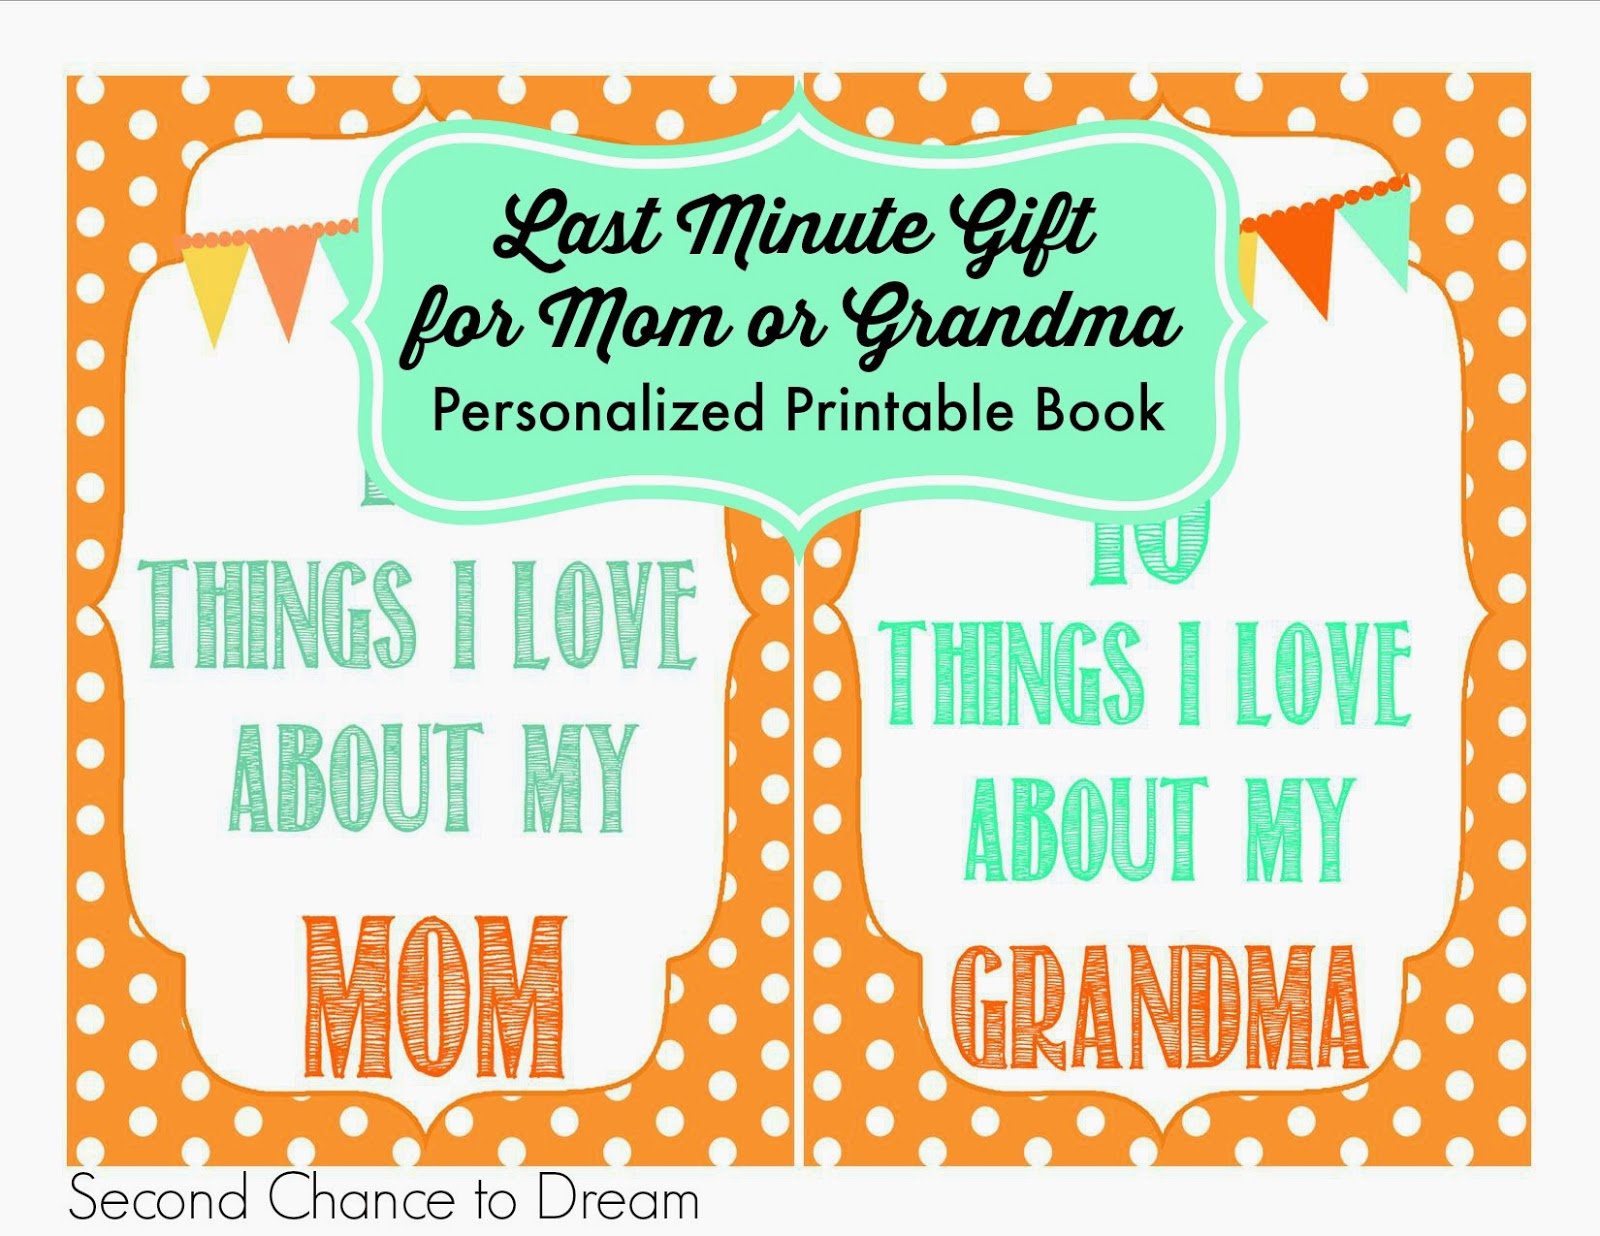 Second Chance to Dream: Printable Gift Book for Mom or Grandma #mothersday 